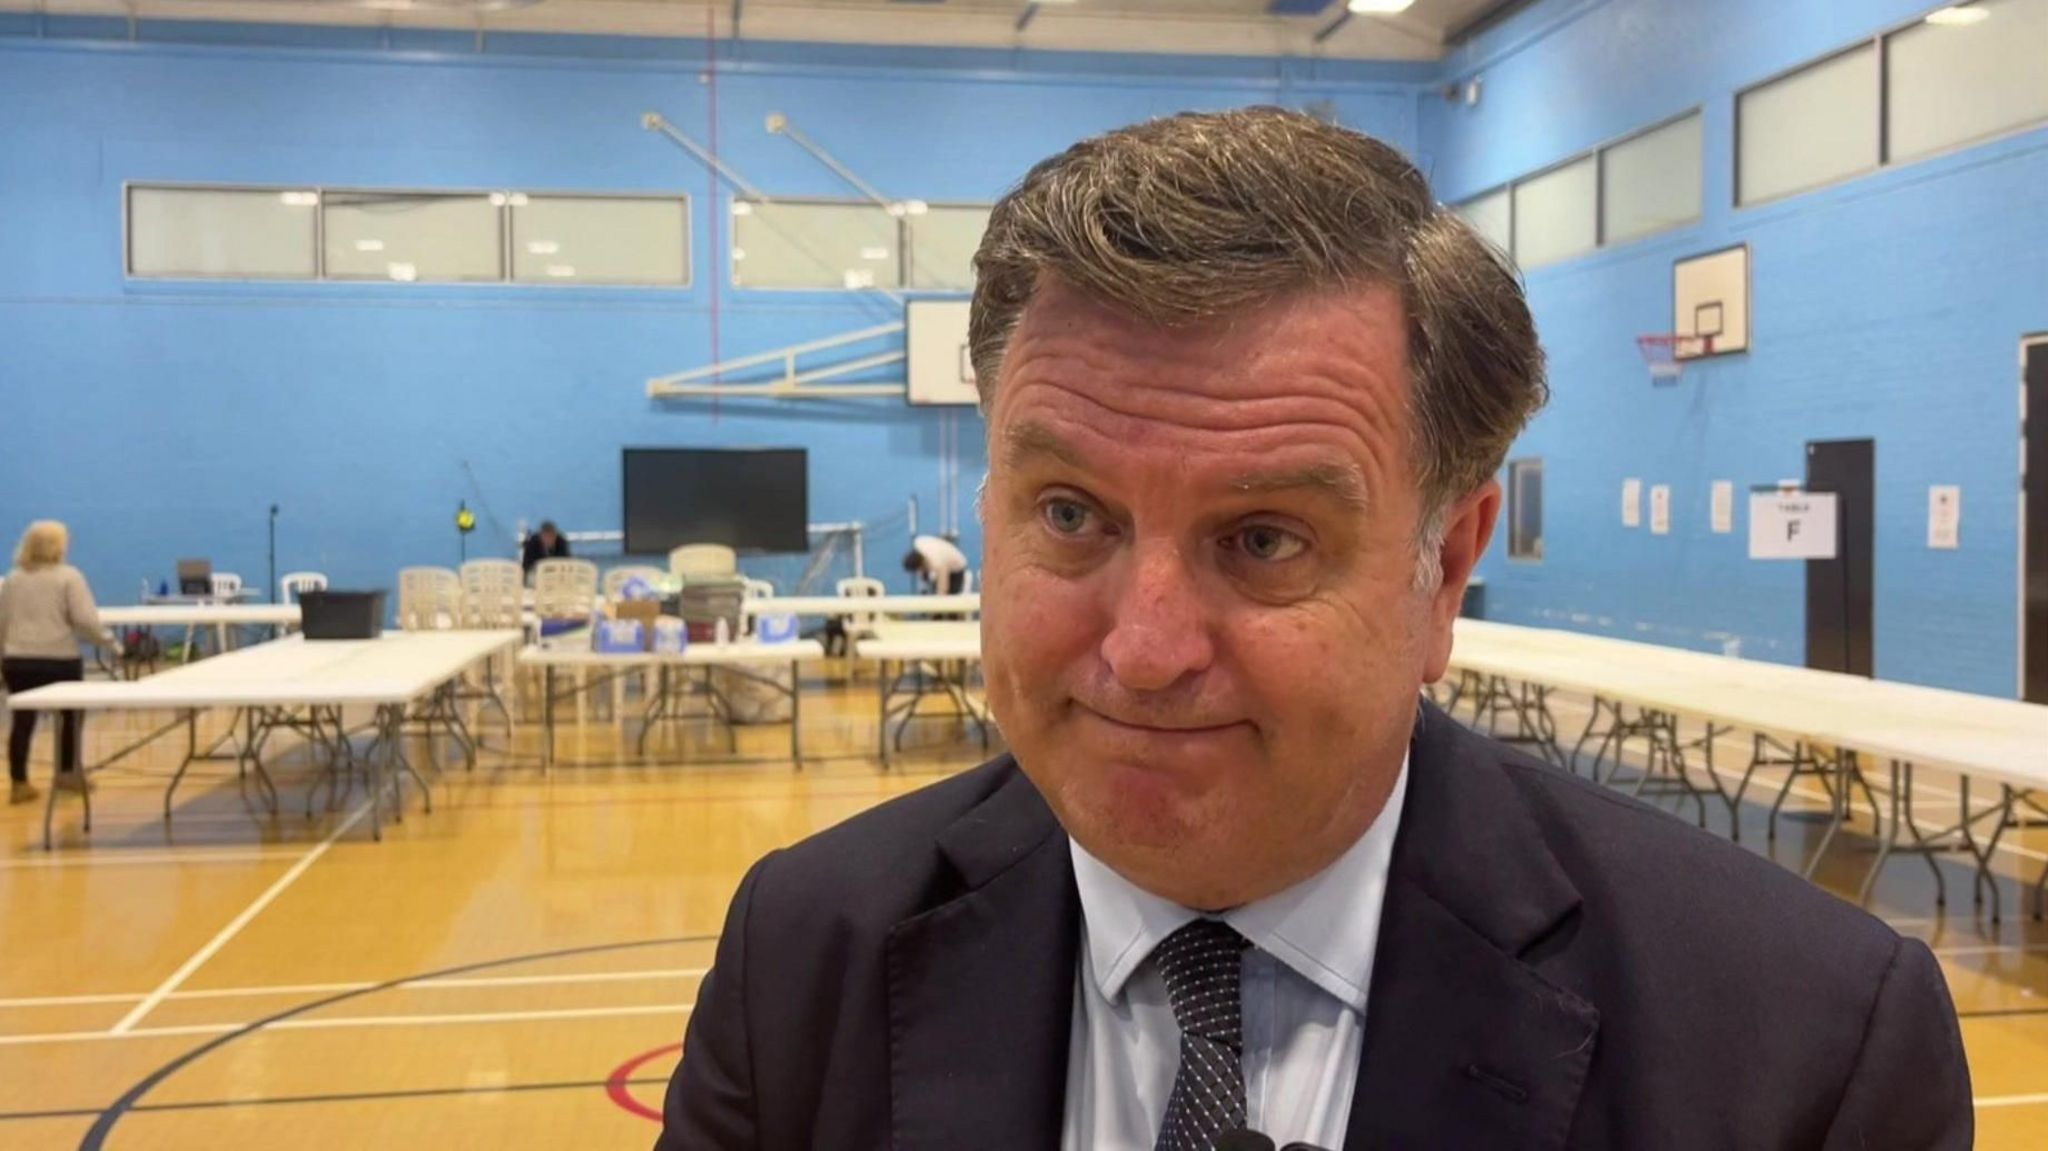 Close-up for Mel, a white man with grey hair with his mouth closed. He is in what appears to be a sports hall at a vote count. He looks disappointed. 